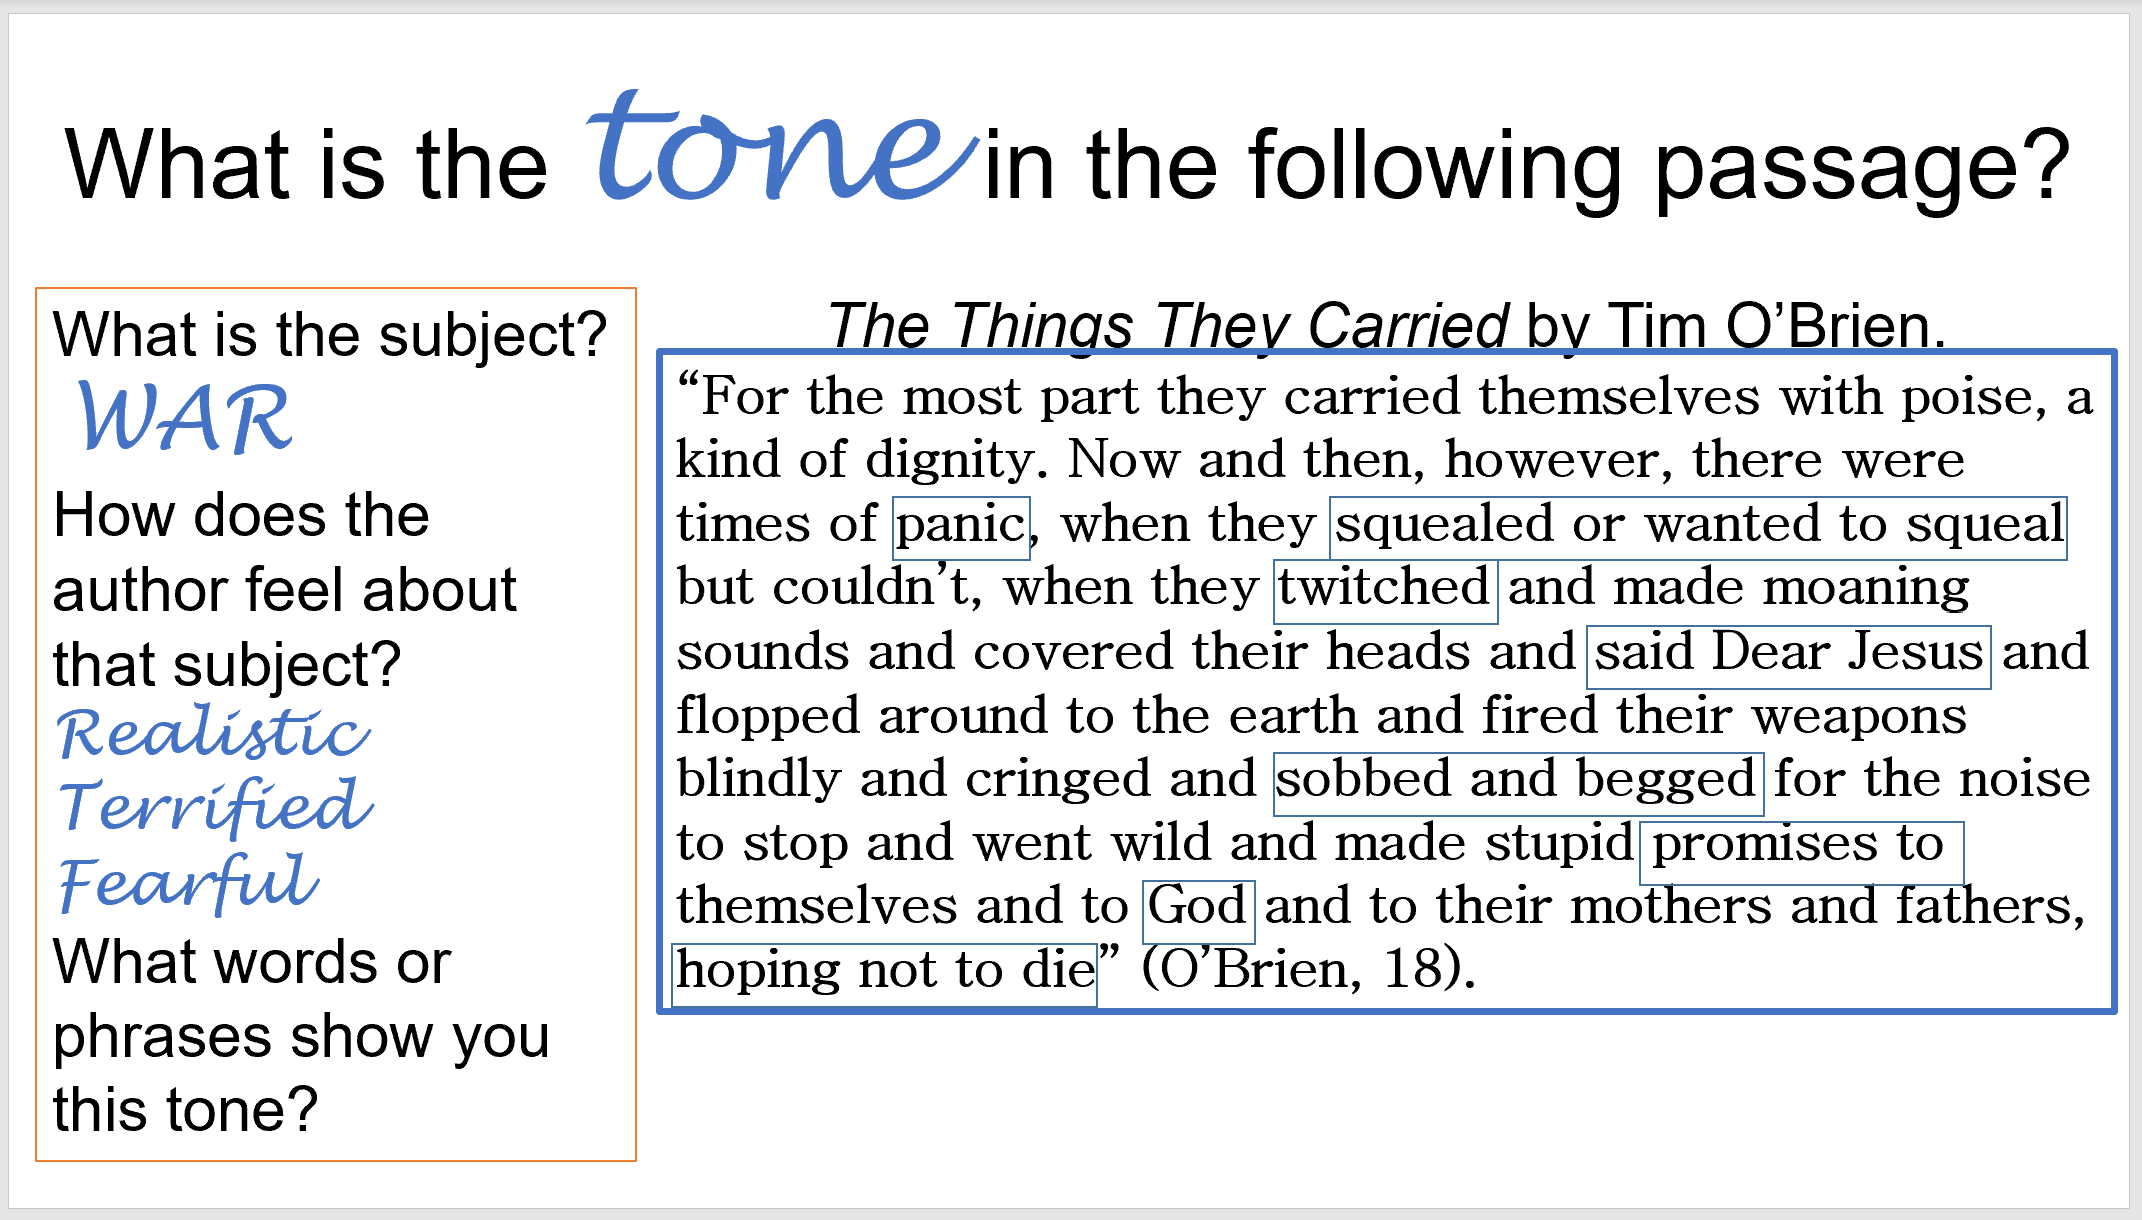 Examples of Tone in a Story